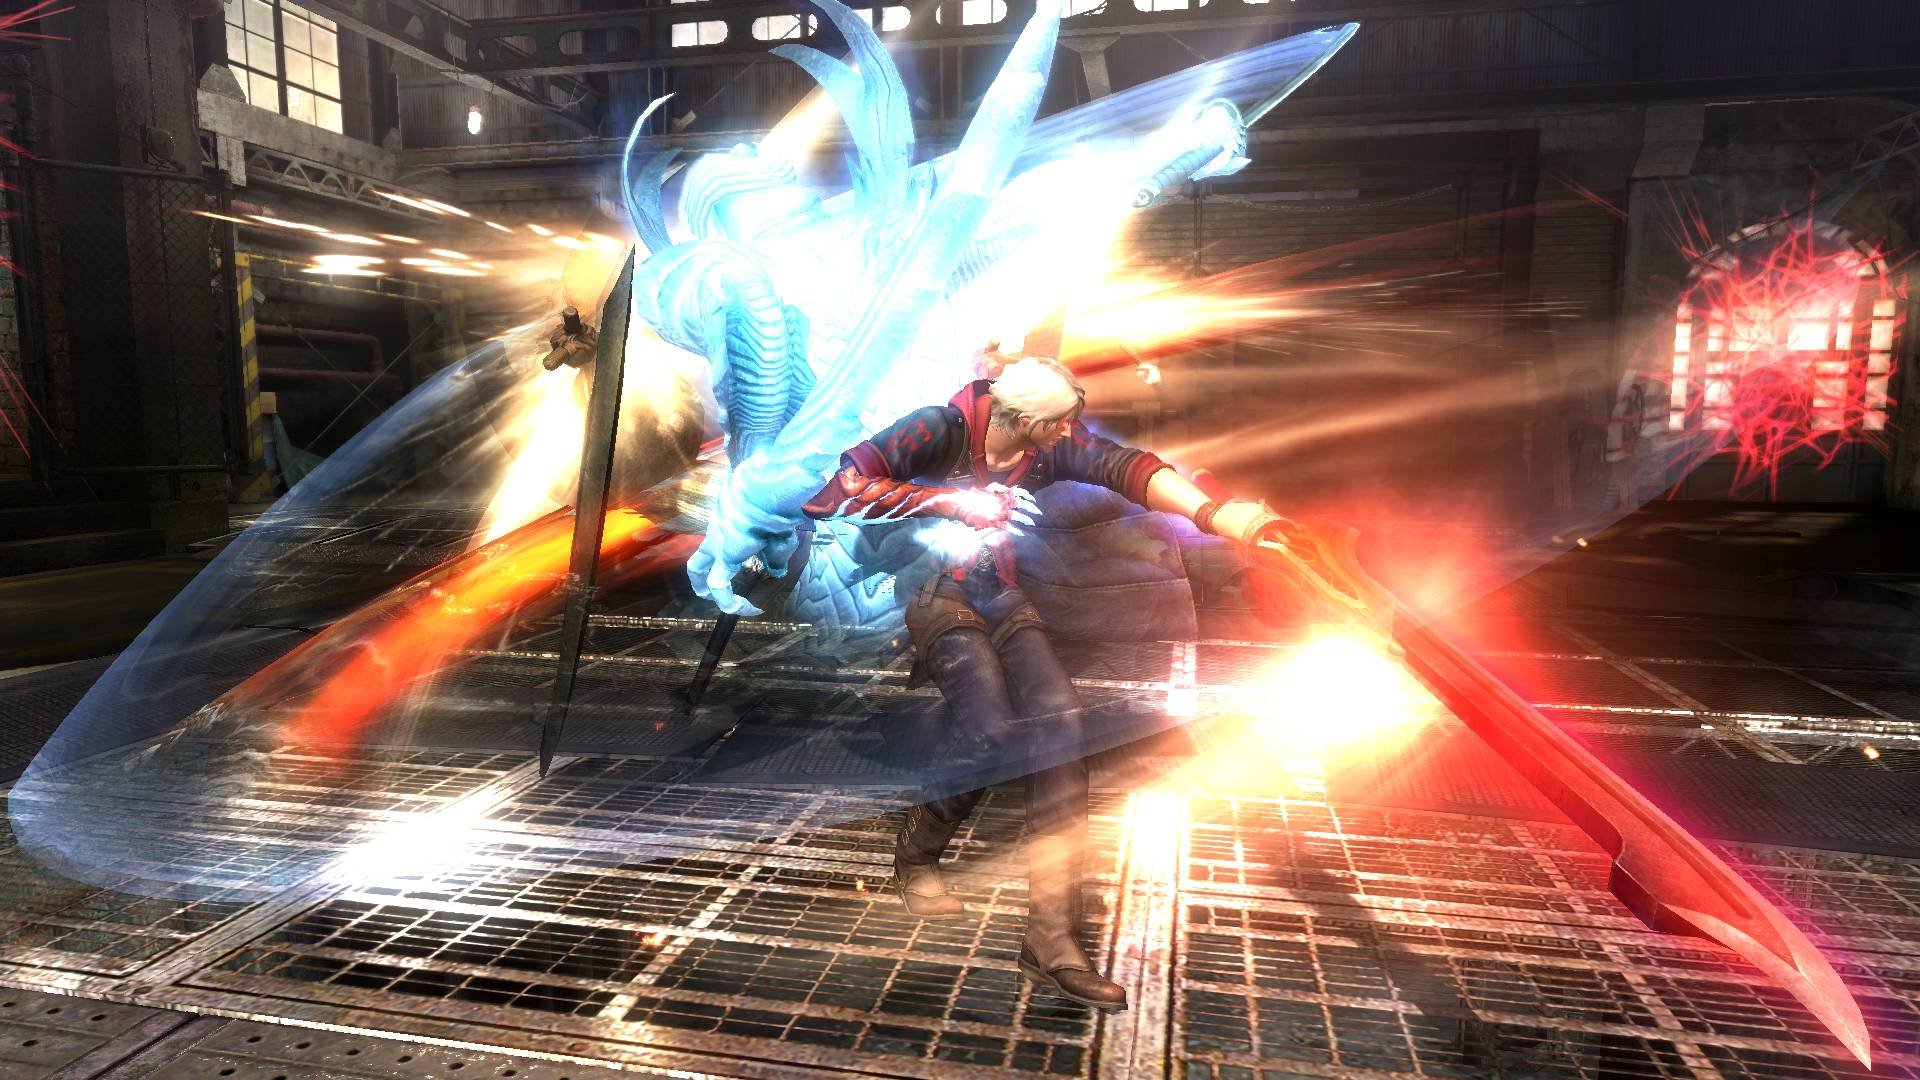 Devil May Cry 4: Special Edition – More than a remaster